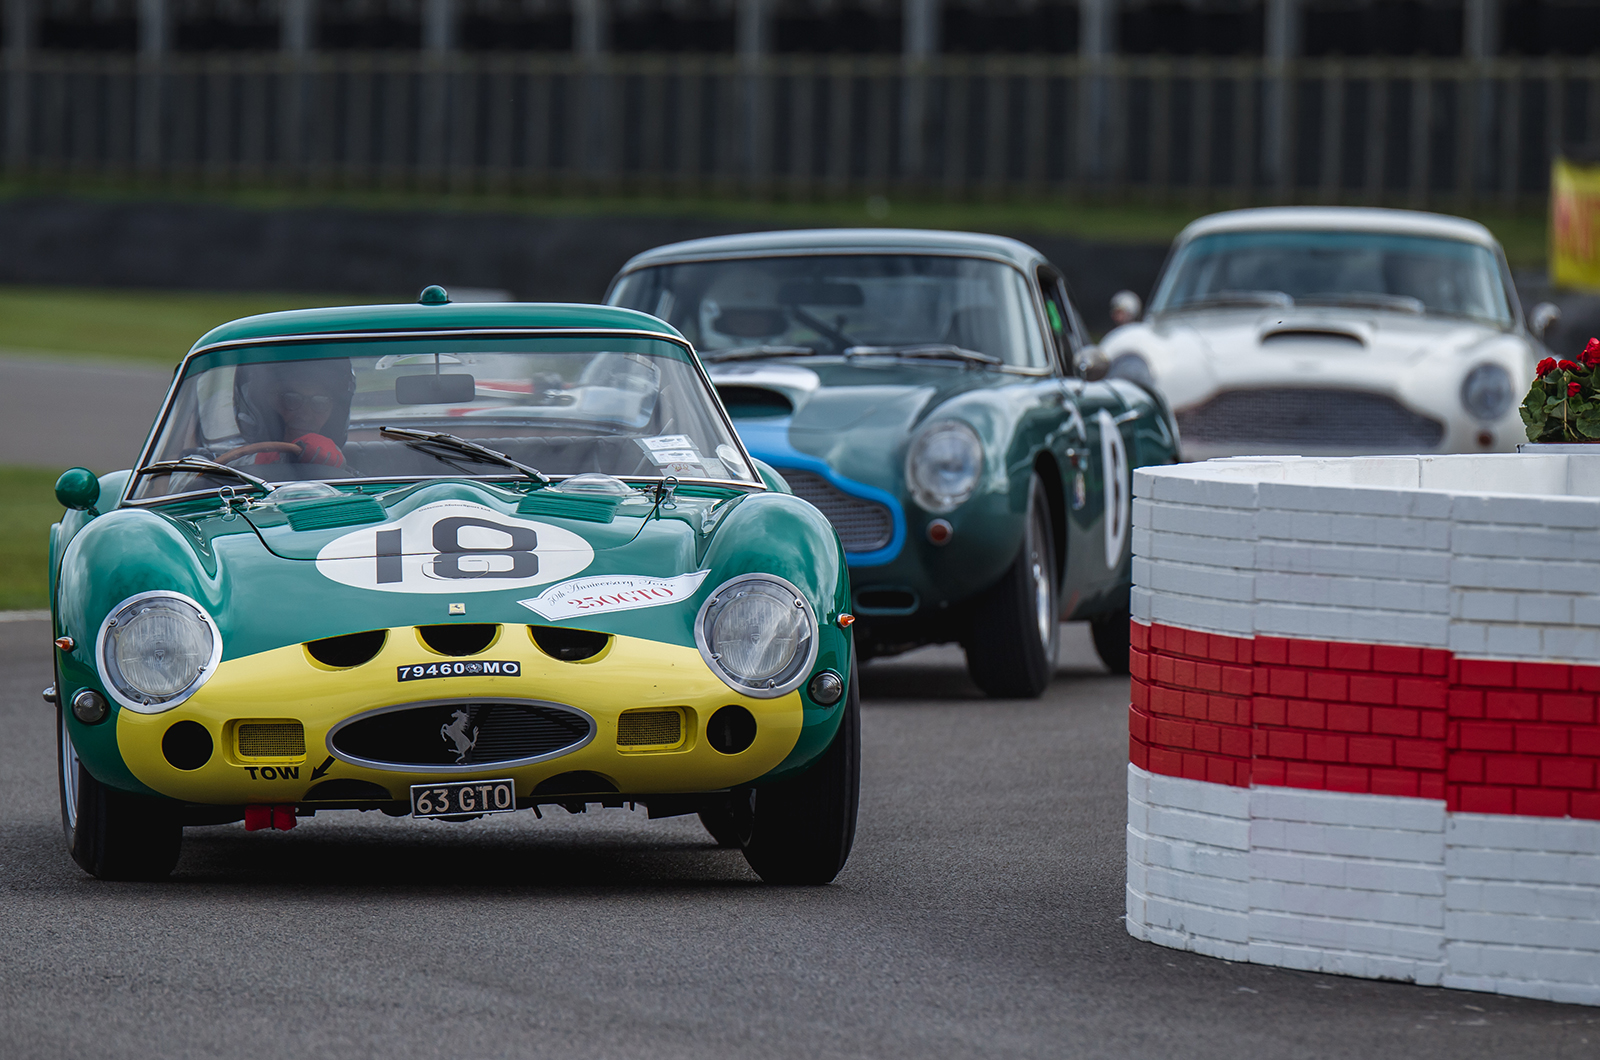 Classic & Sports Car – Who'll be the first winner at the 2018 Goodwood Revival?